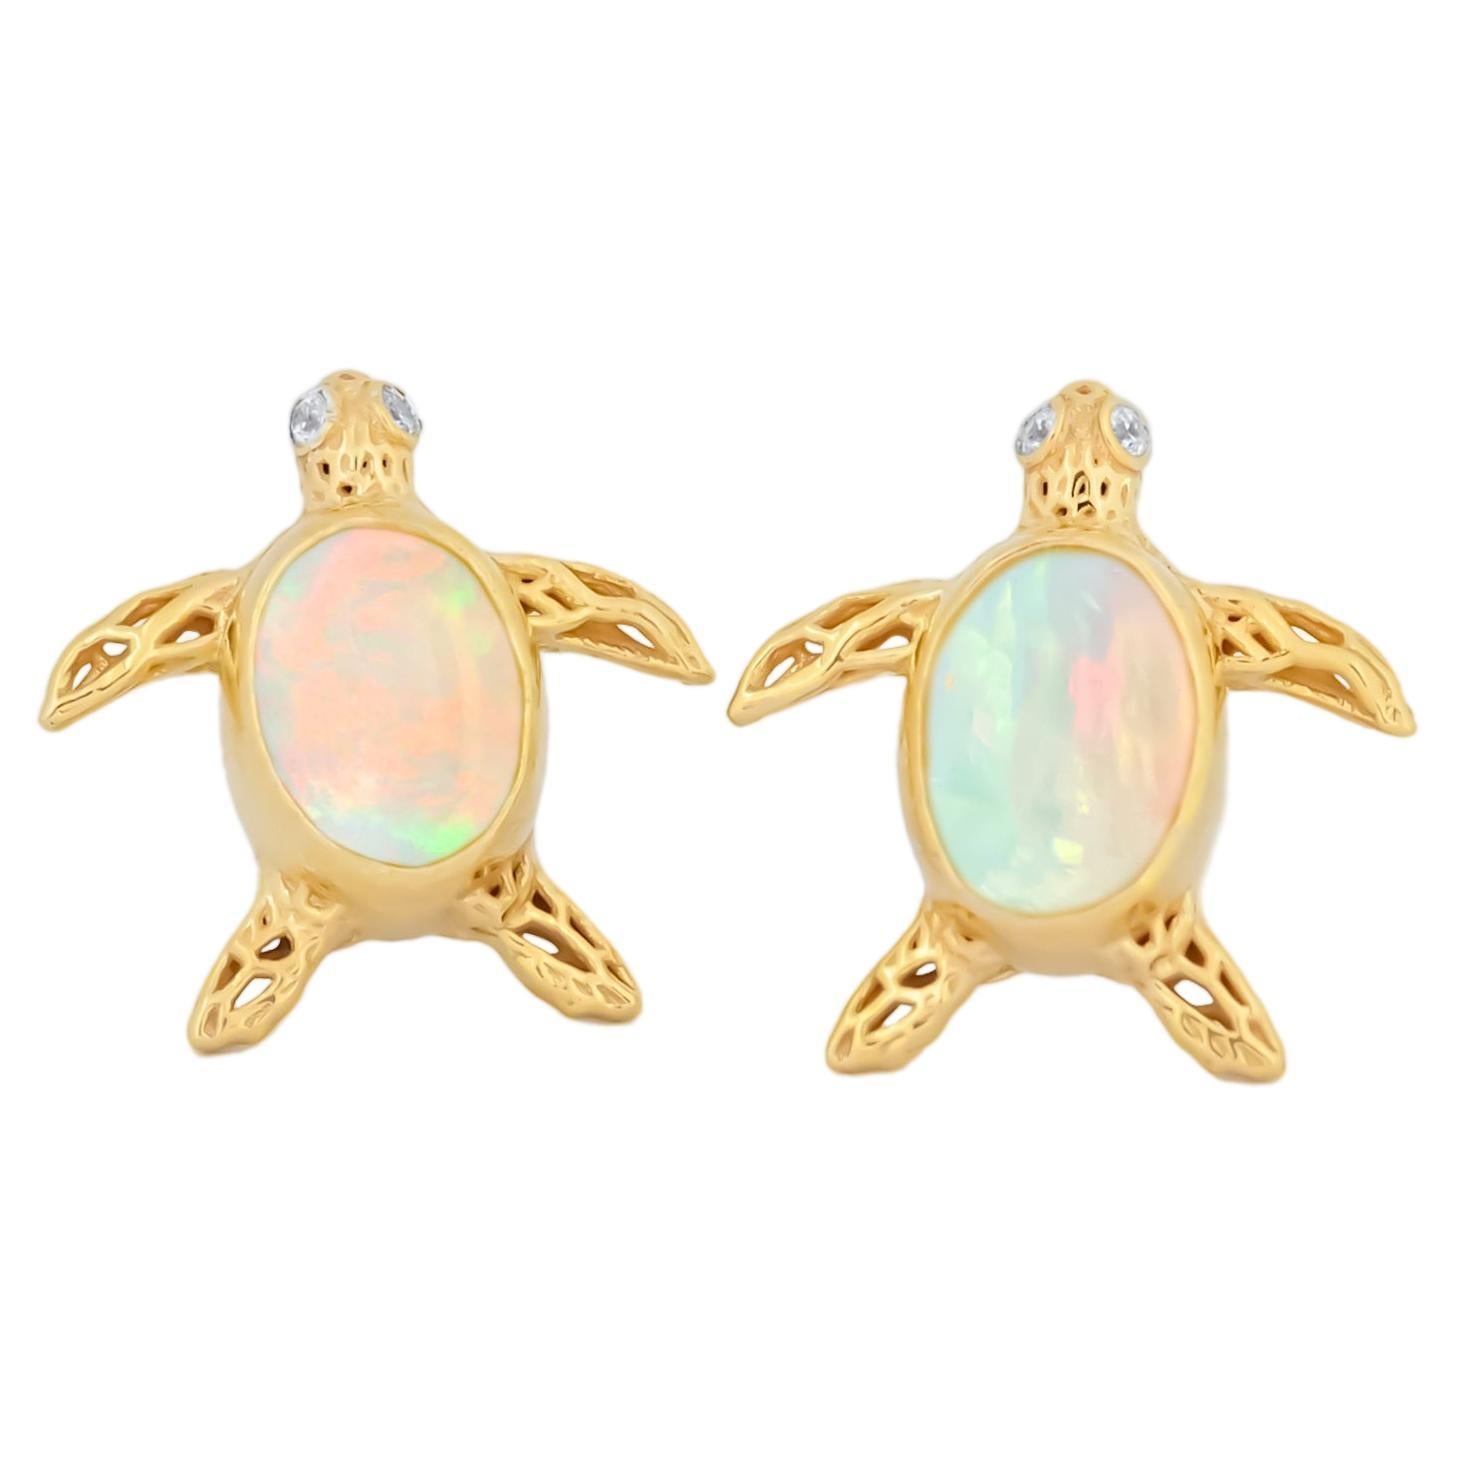 Turtle earrings studs with opals in 14k gold.